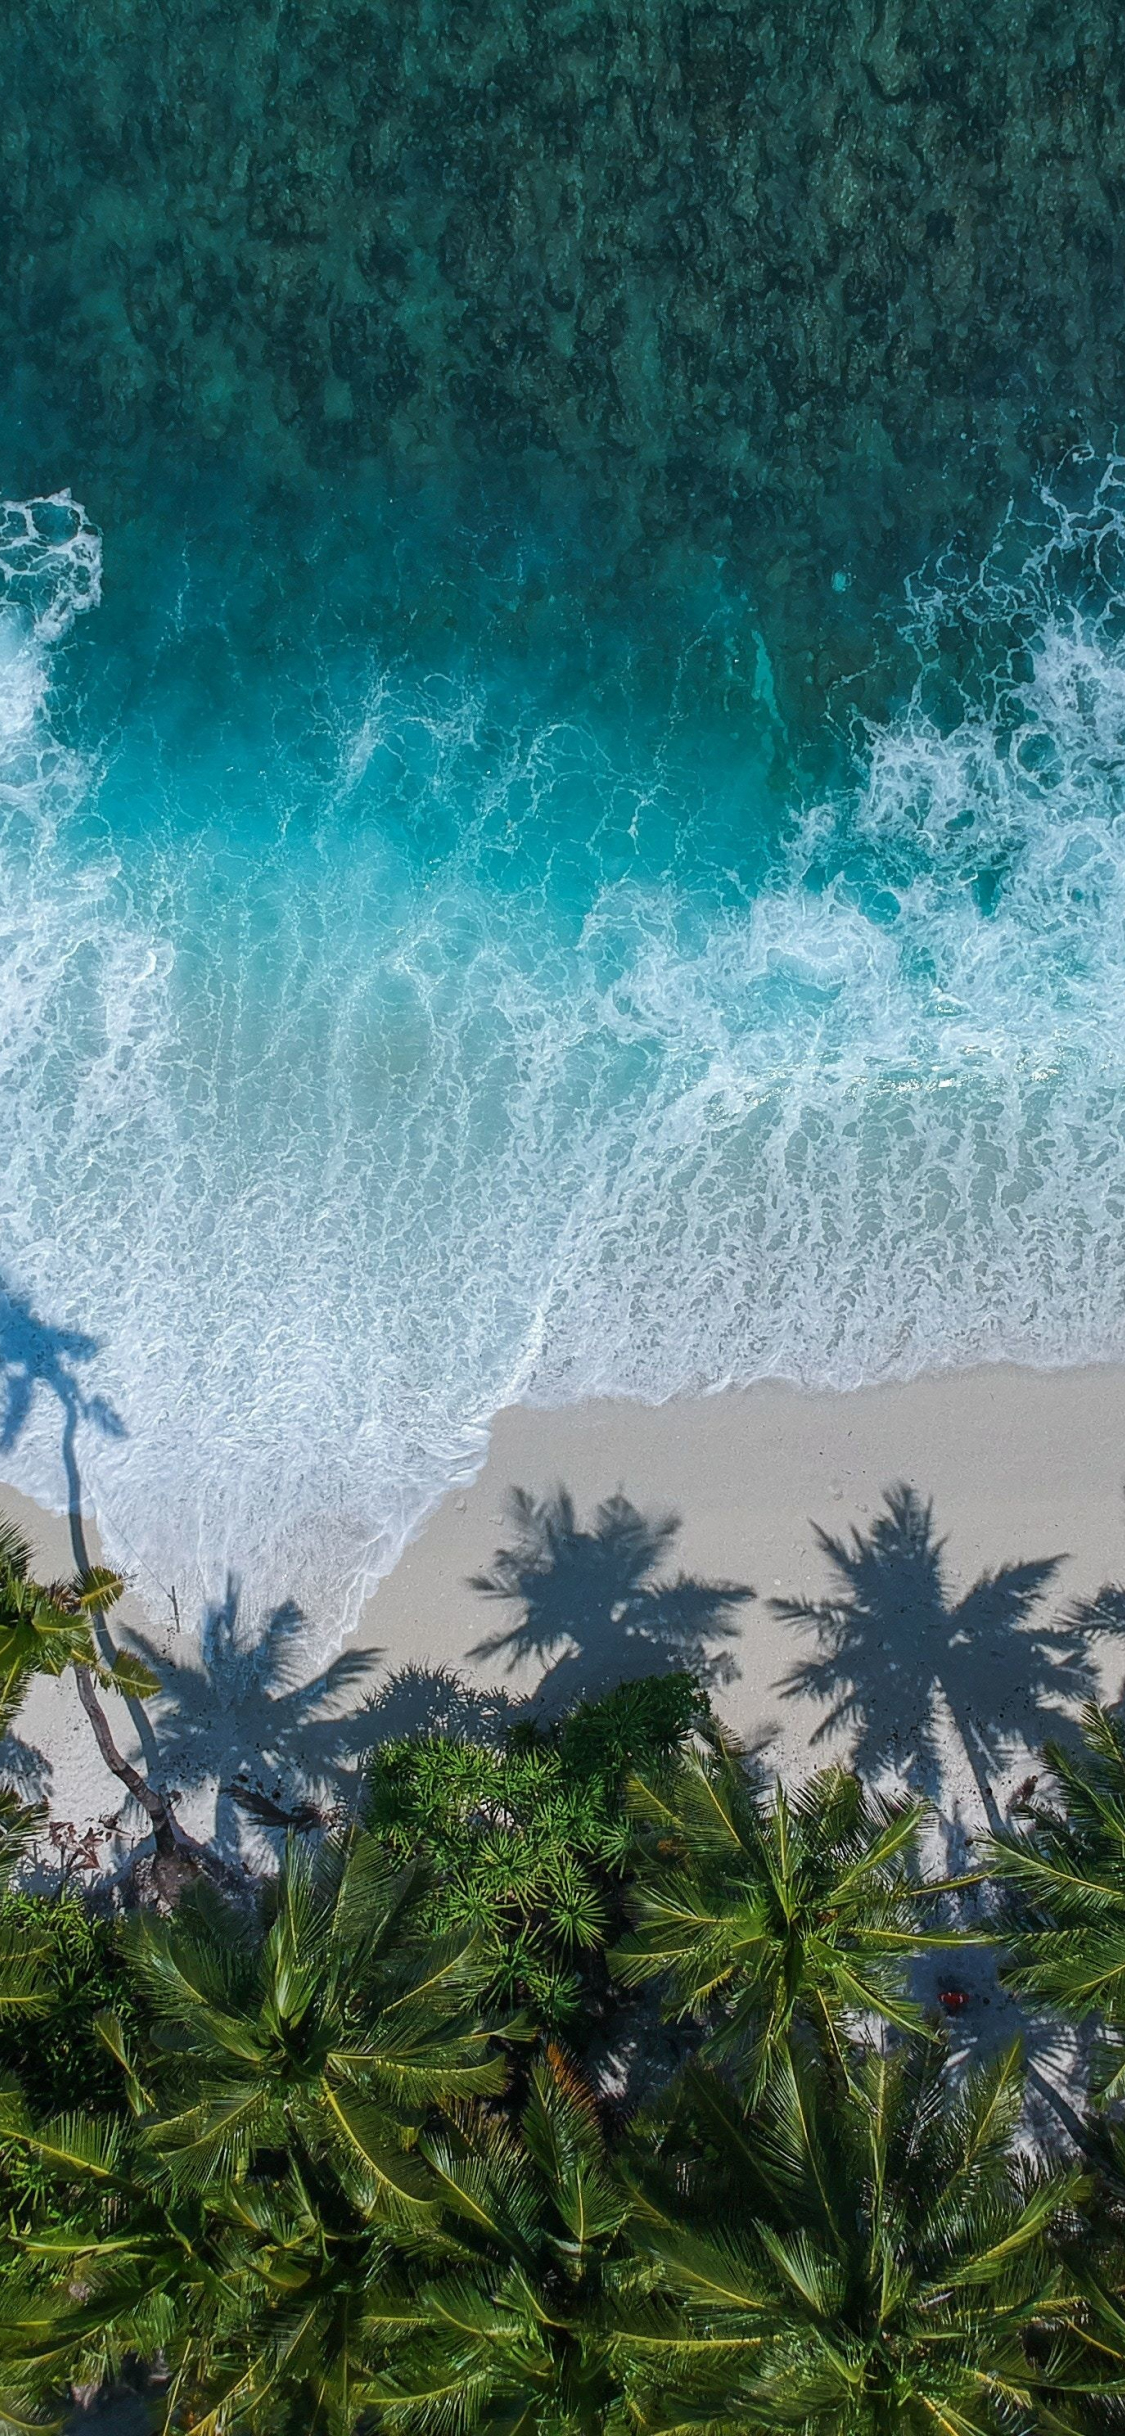 Download wallpaper 1125x2436 beautiful beach, aerial view, palm trees, sea,  iphone x, 1125x2436 hd background, 17336